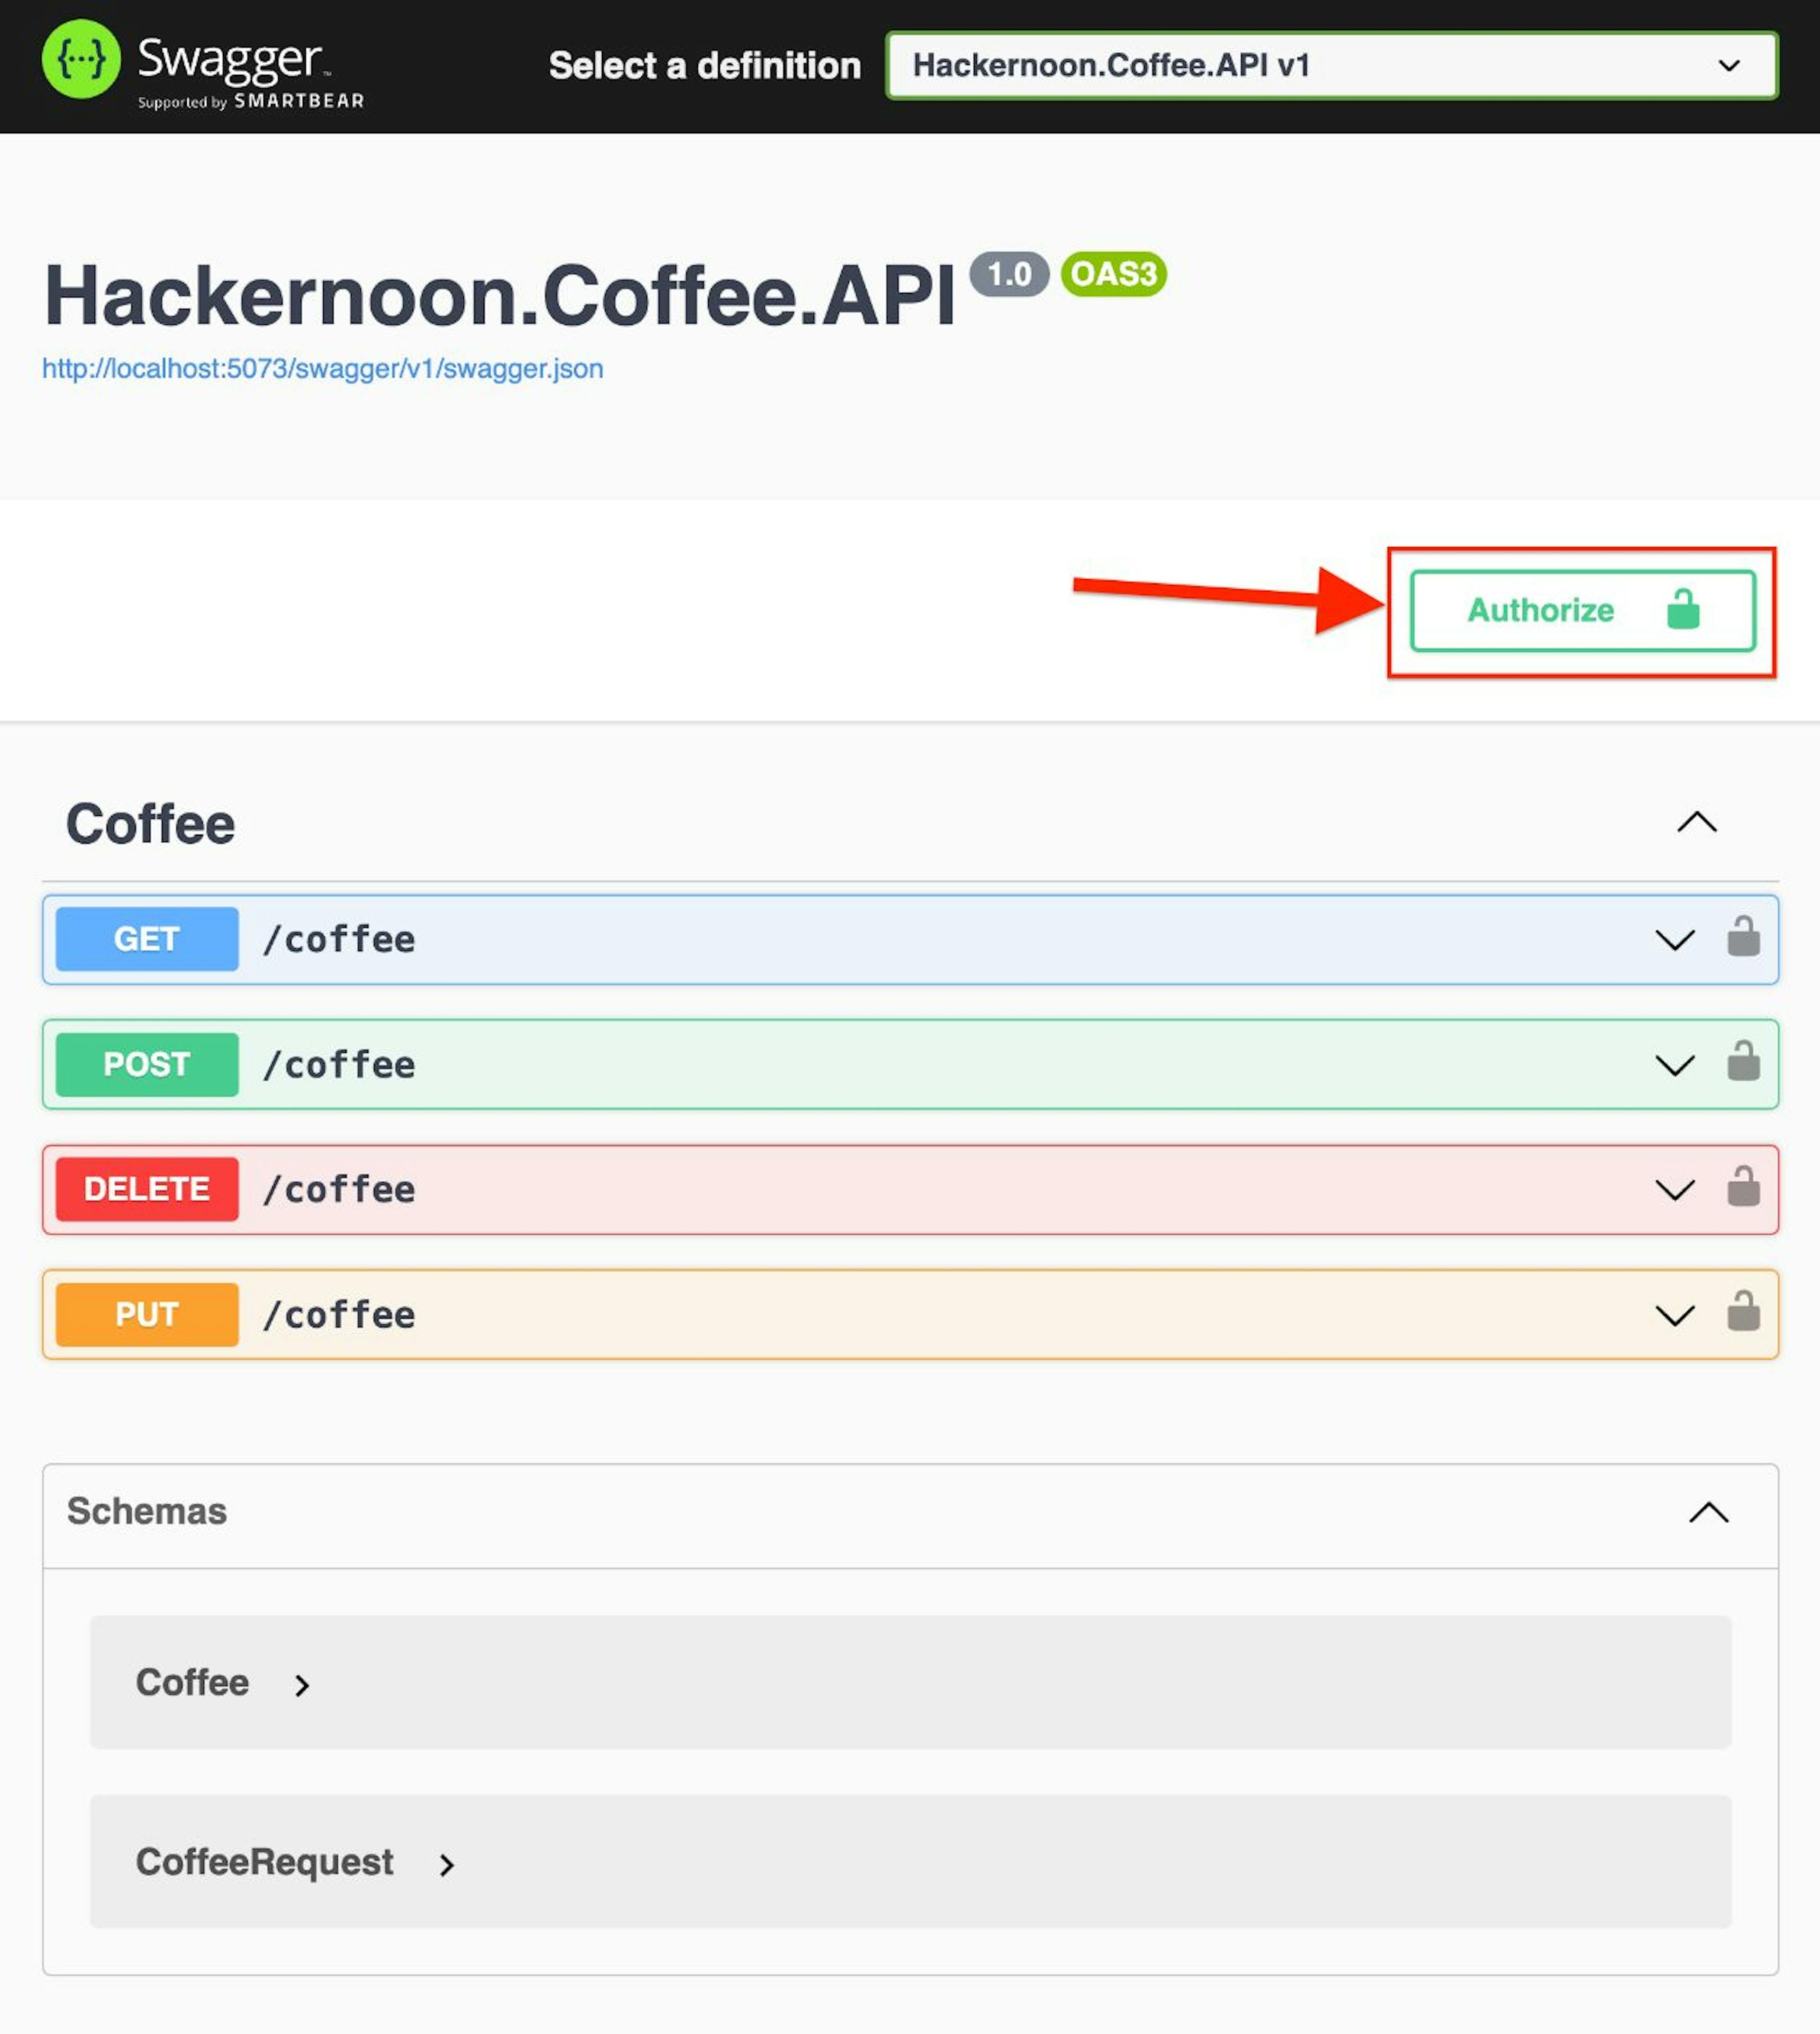 Coffee API - Authorize button appeared